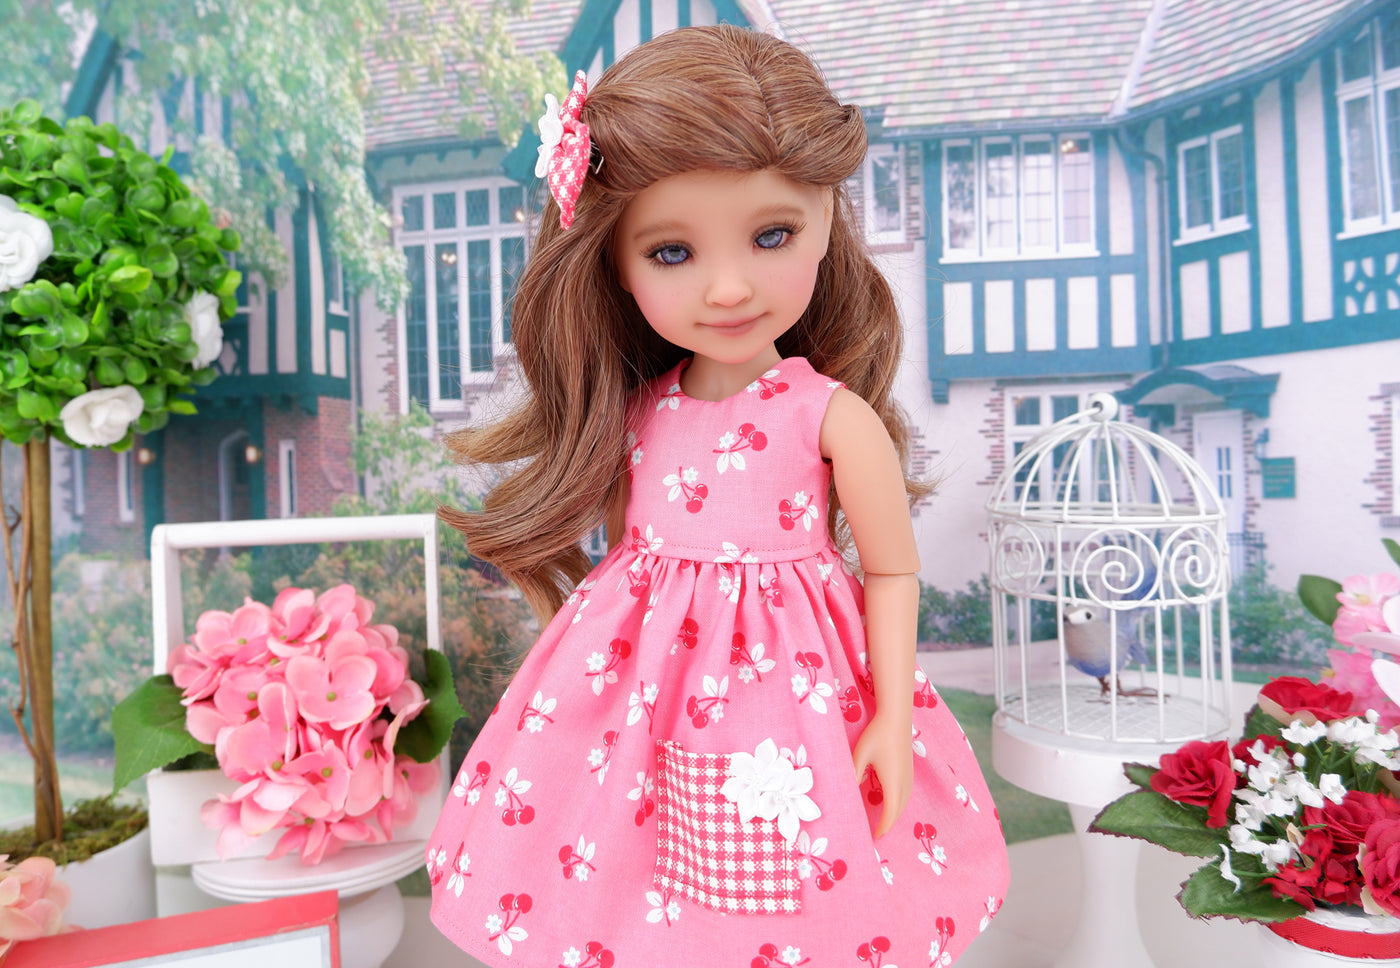 Cheery Cherry - dress with shoes for Ruby Red Fashion Friends doll